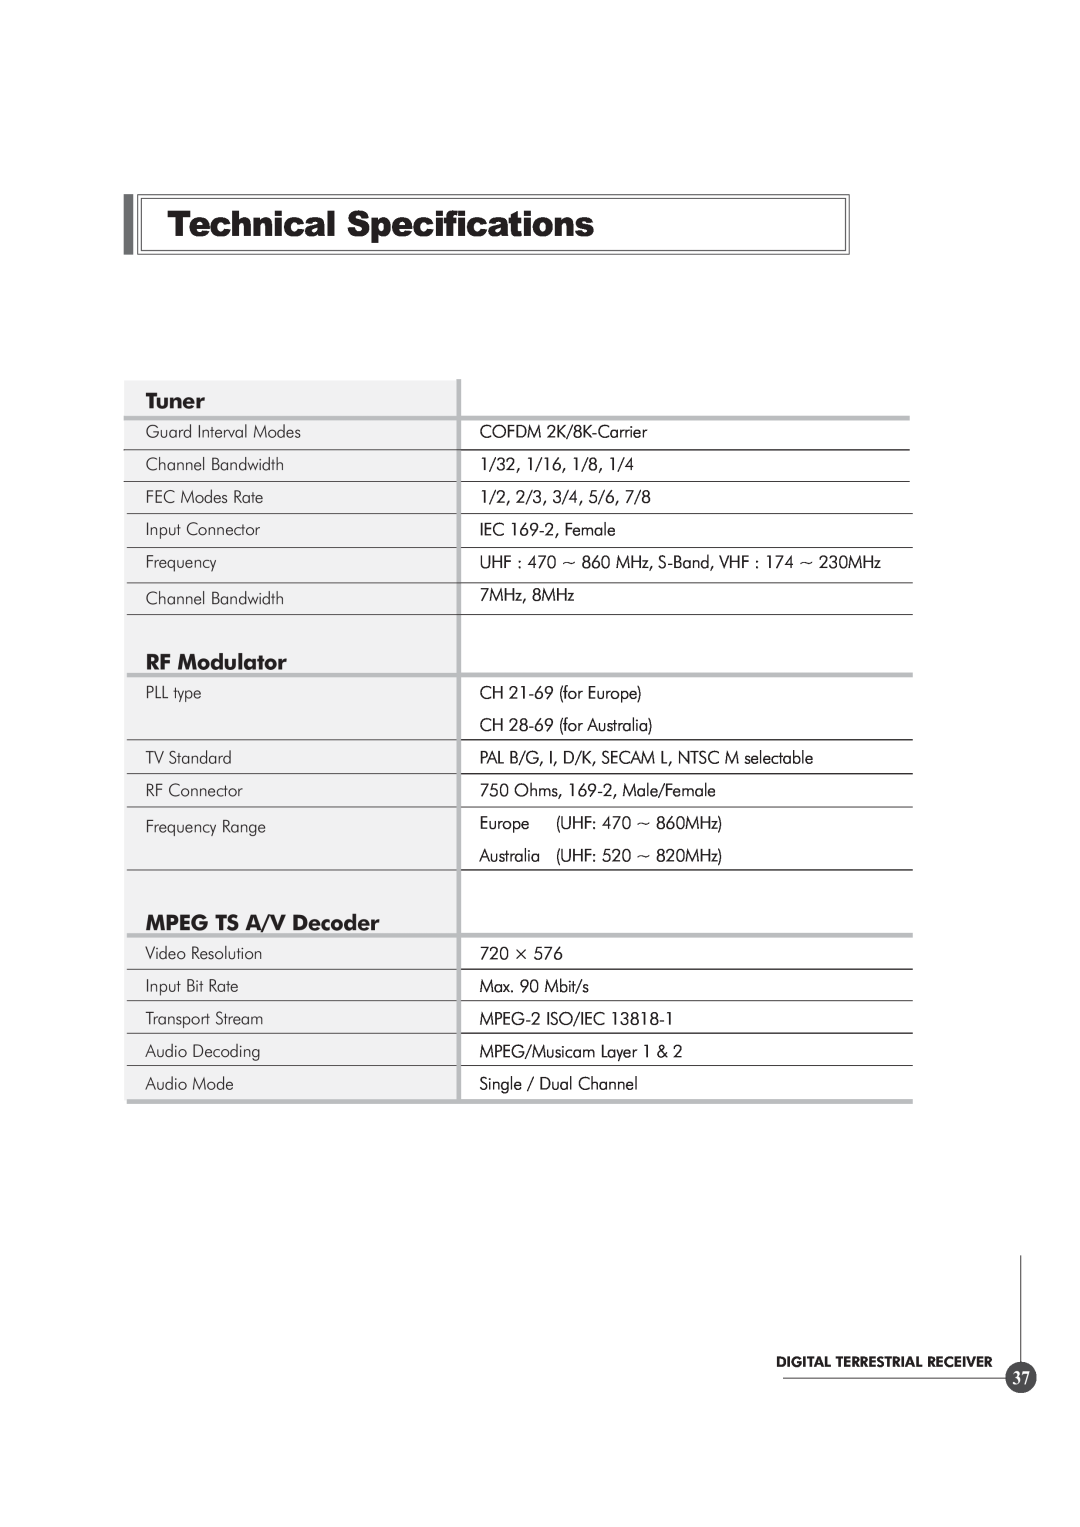 Triax TR 305 manual Technical Specifications, Tuner, RF Modulator, MPEG TS A/V Decoder 